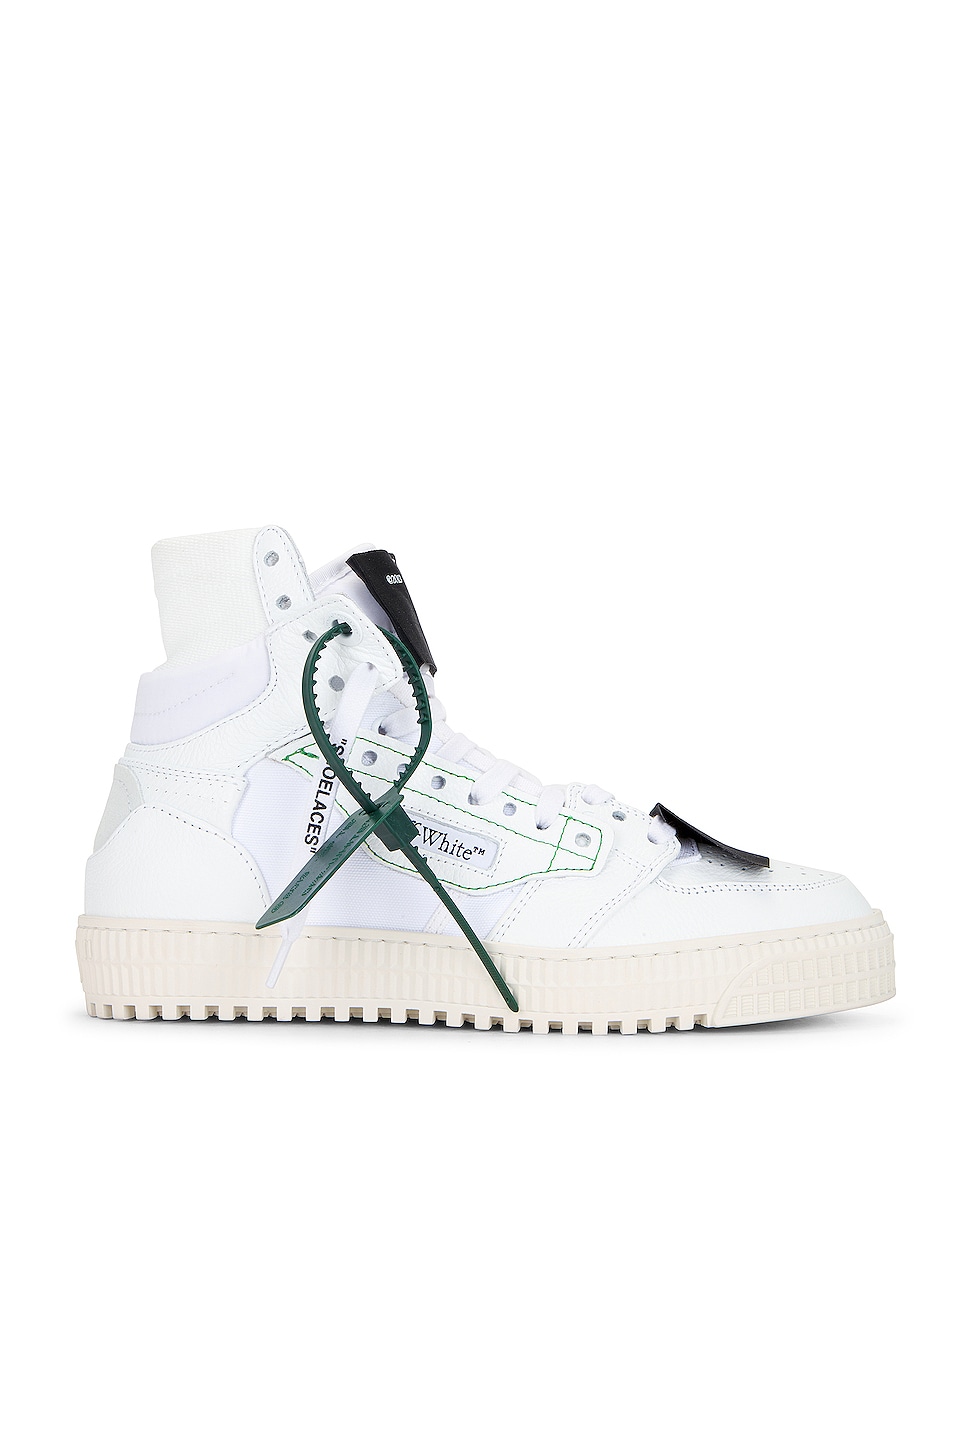 Image 1 of OFF-WHITE 3.0 Off Court Sneaker in White & Black